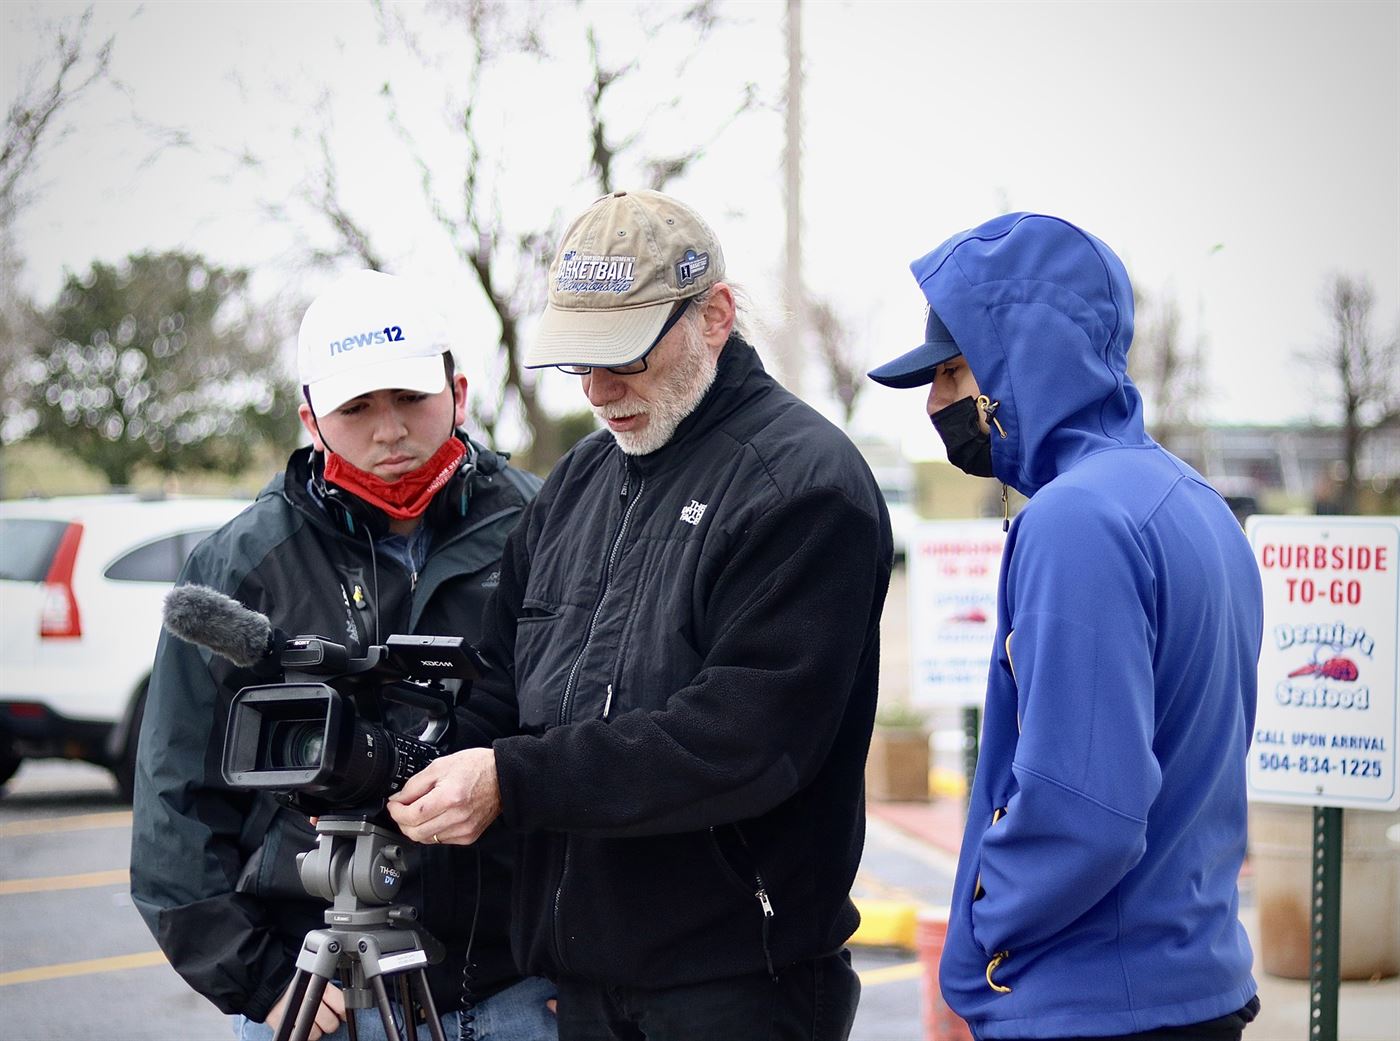 Professor McCarthy and two other students prepare their equipment for their shoot.